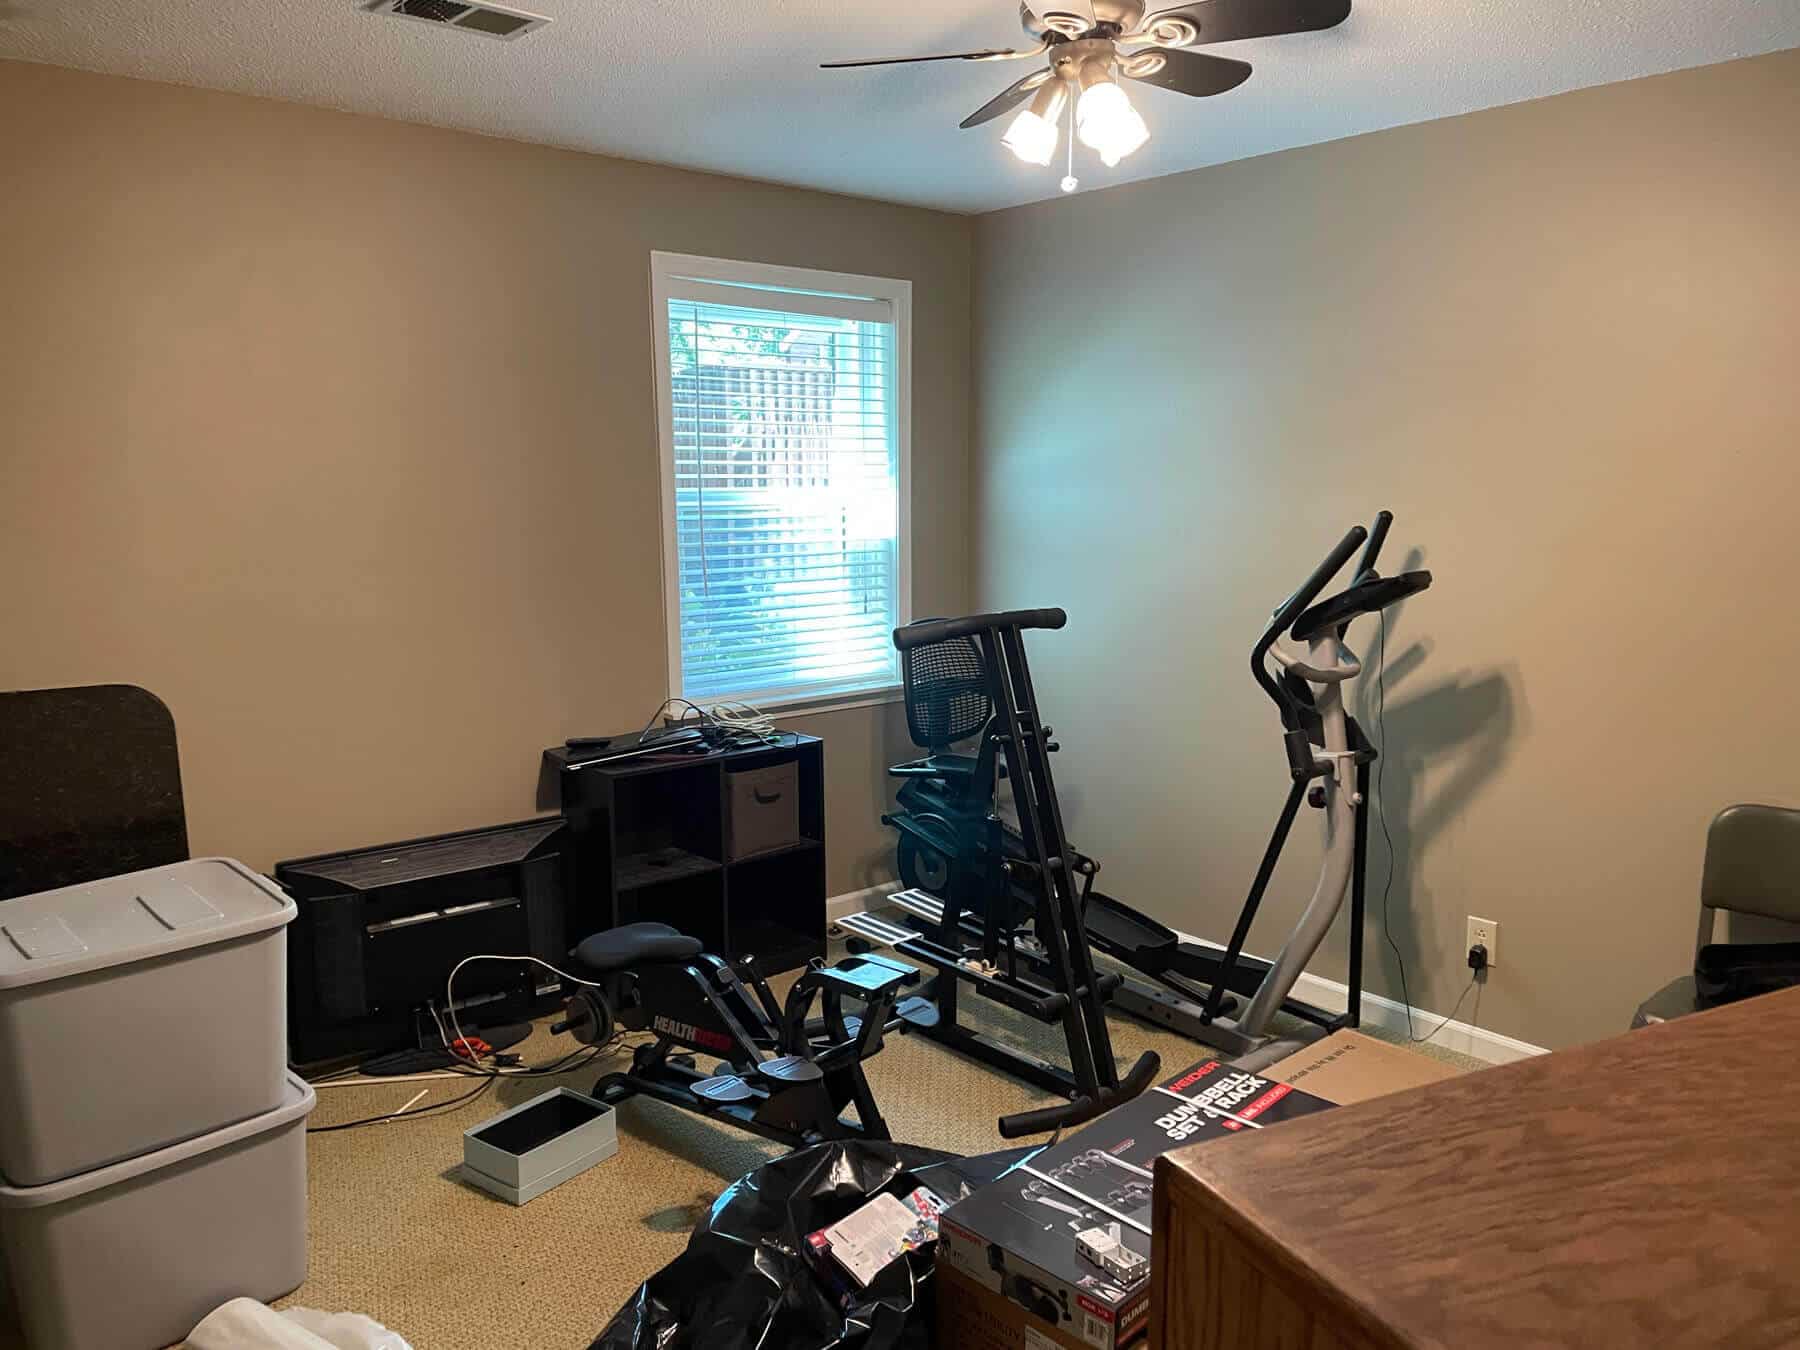 We took a room in our basement and created a workout space for our family. If you are looking for ways to workout in the comfort of your own home, check out our small home gym reveal.